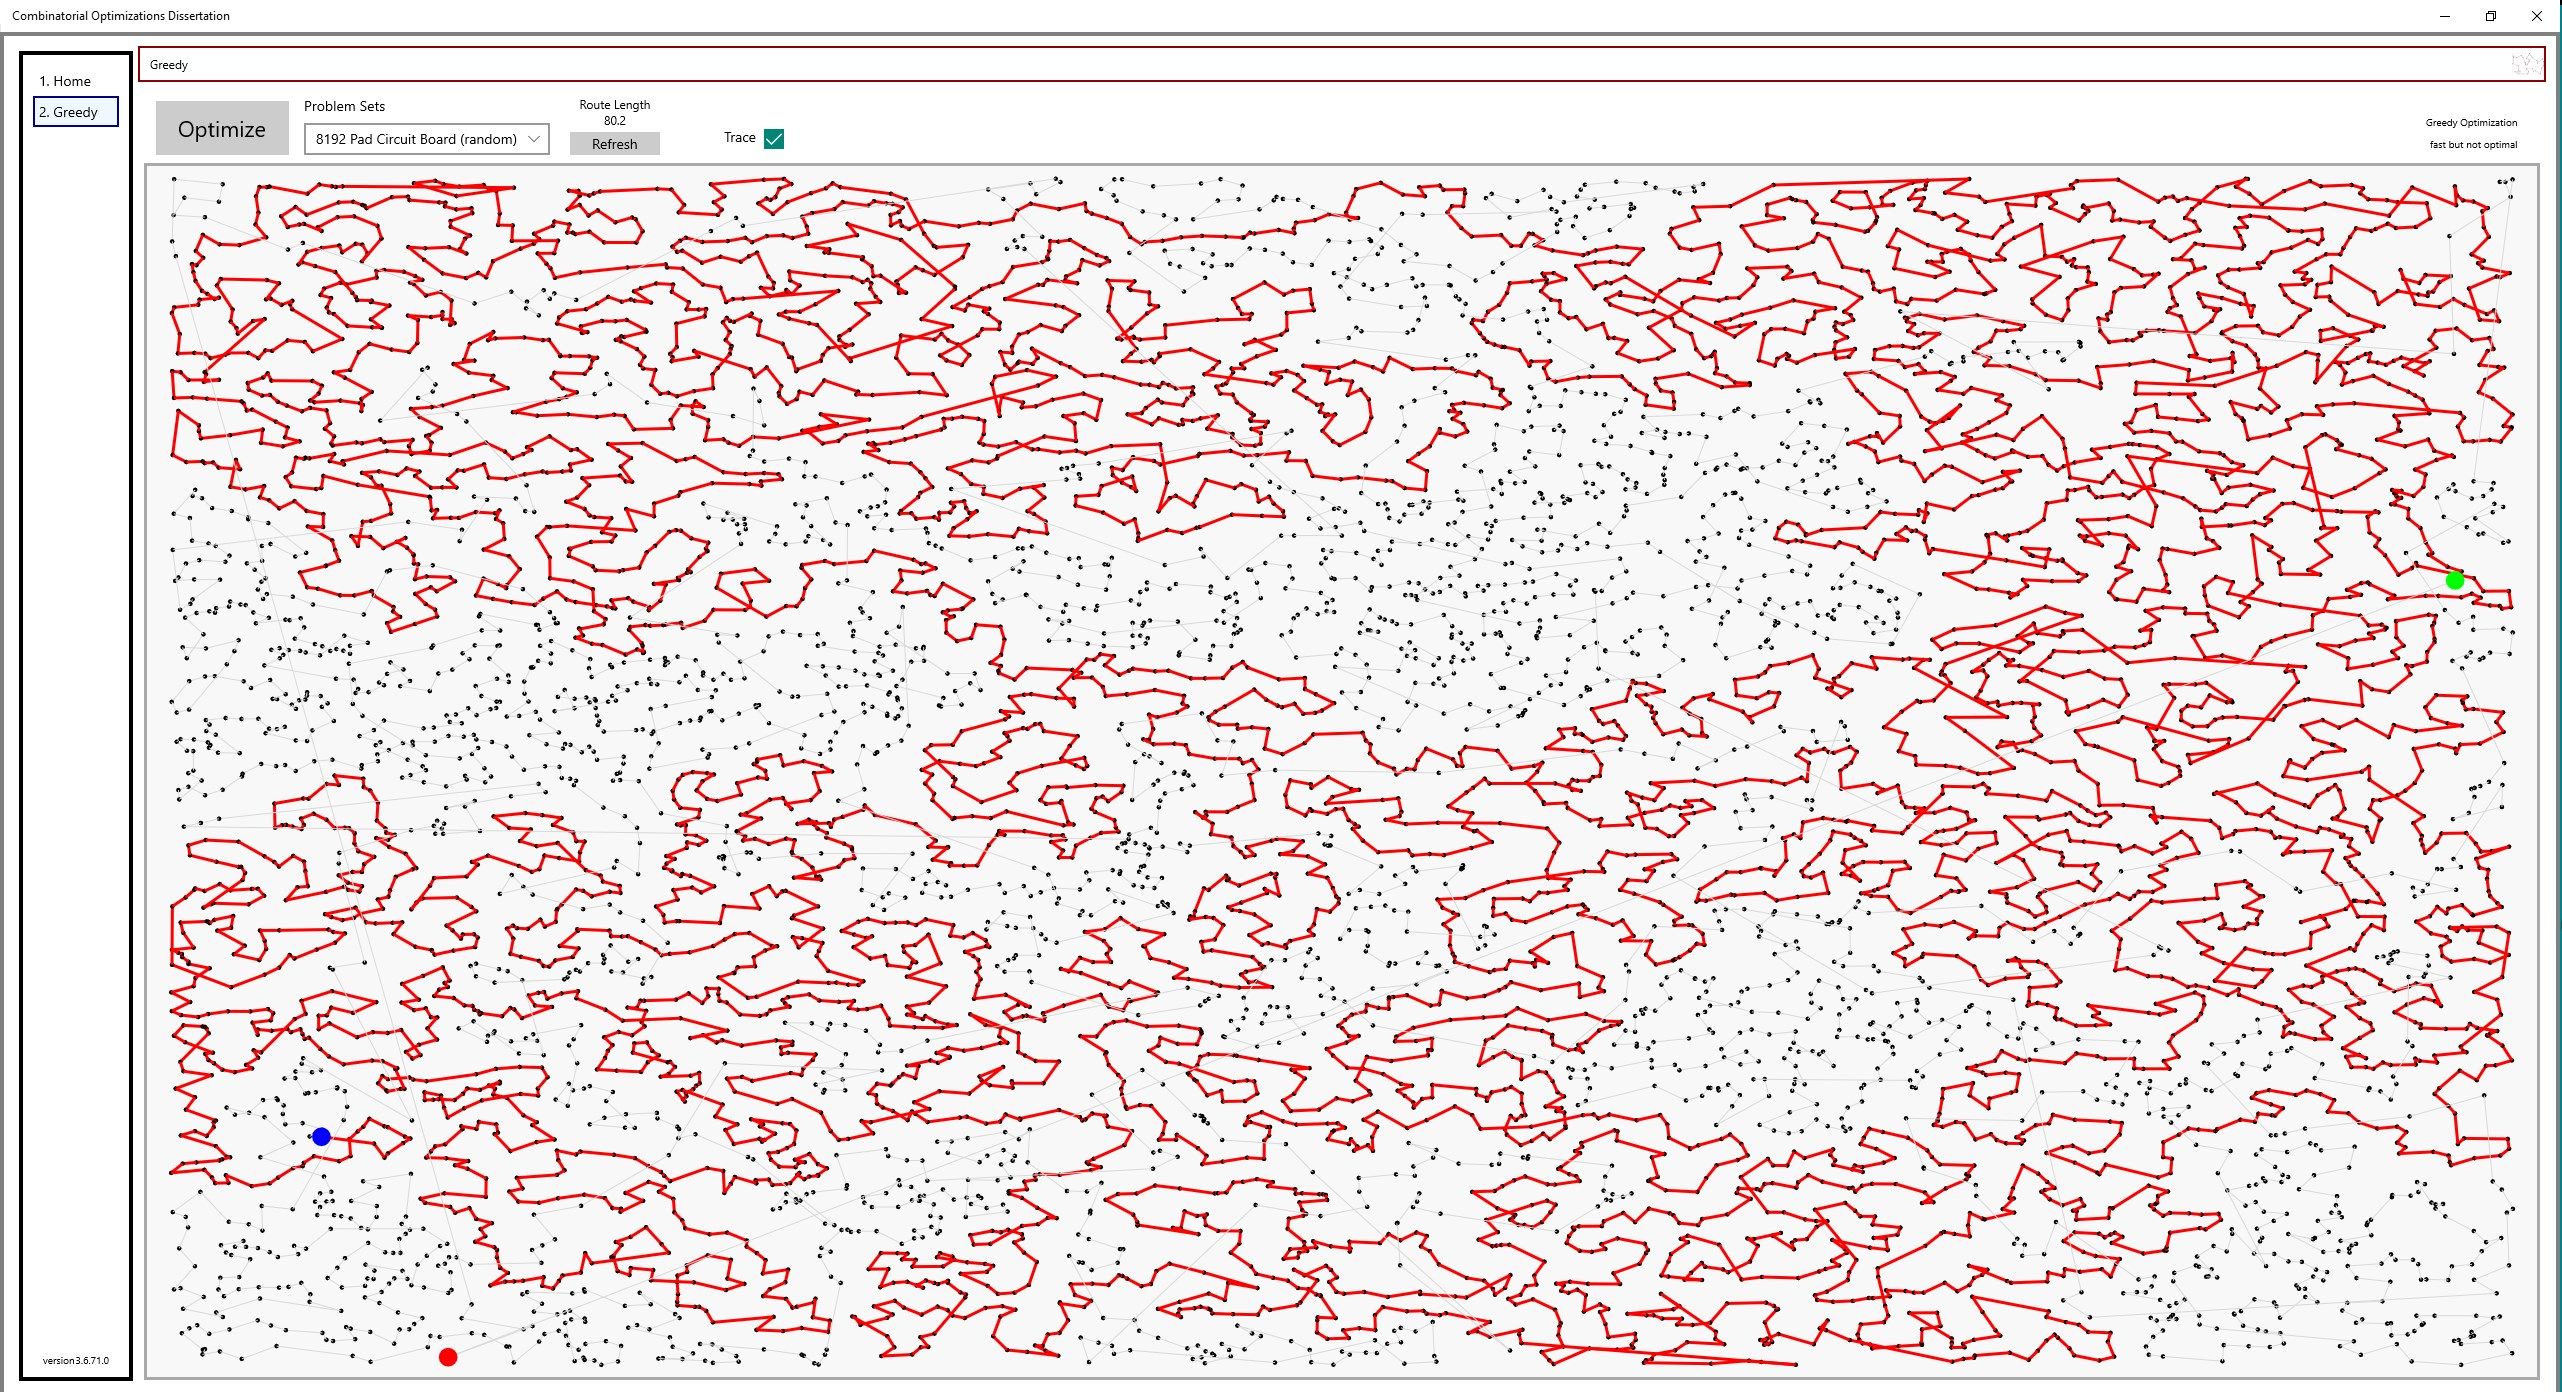 Screen shot - Greedy algorithm optimization with route tracing enabled